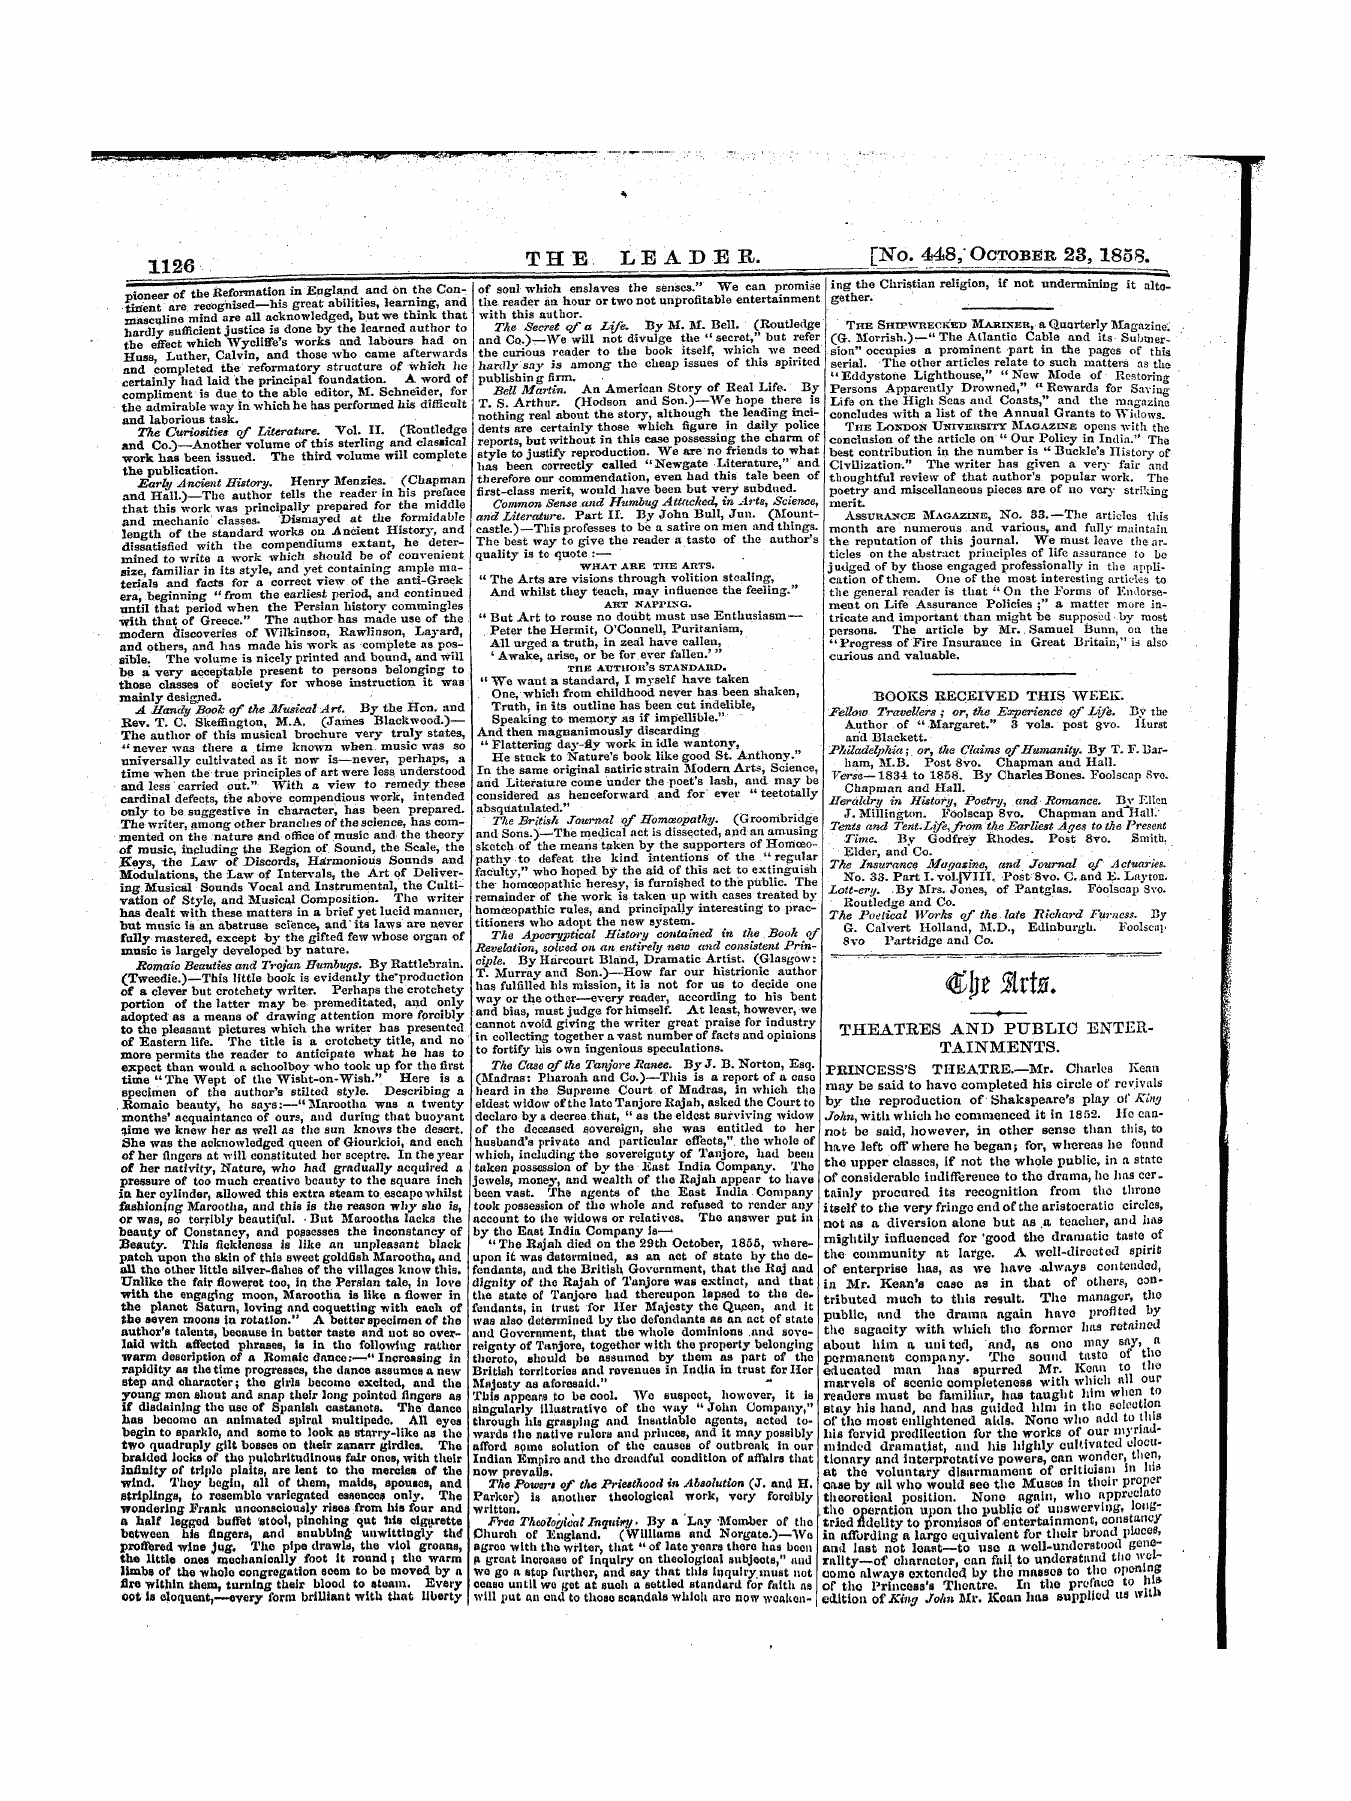 Leader (1850-1860): jS F Y, 1st edition: 14